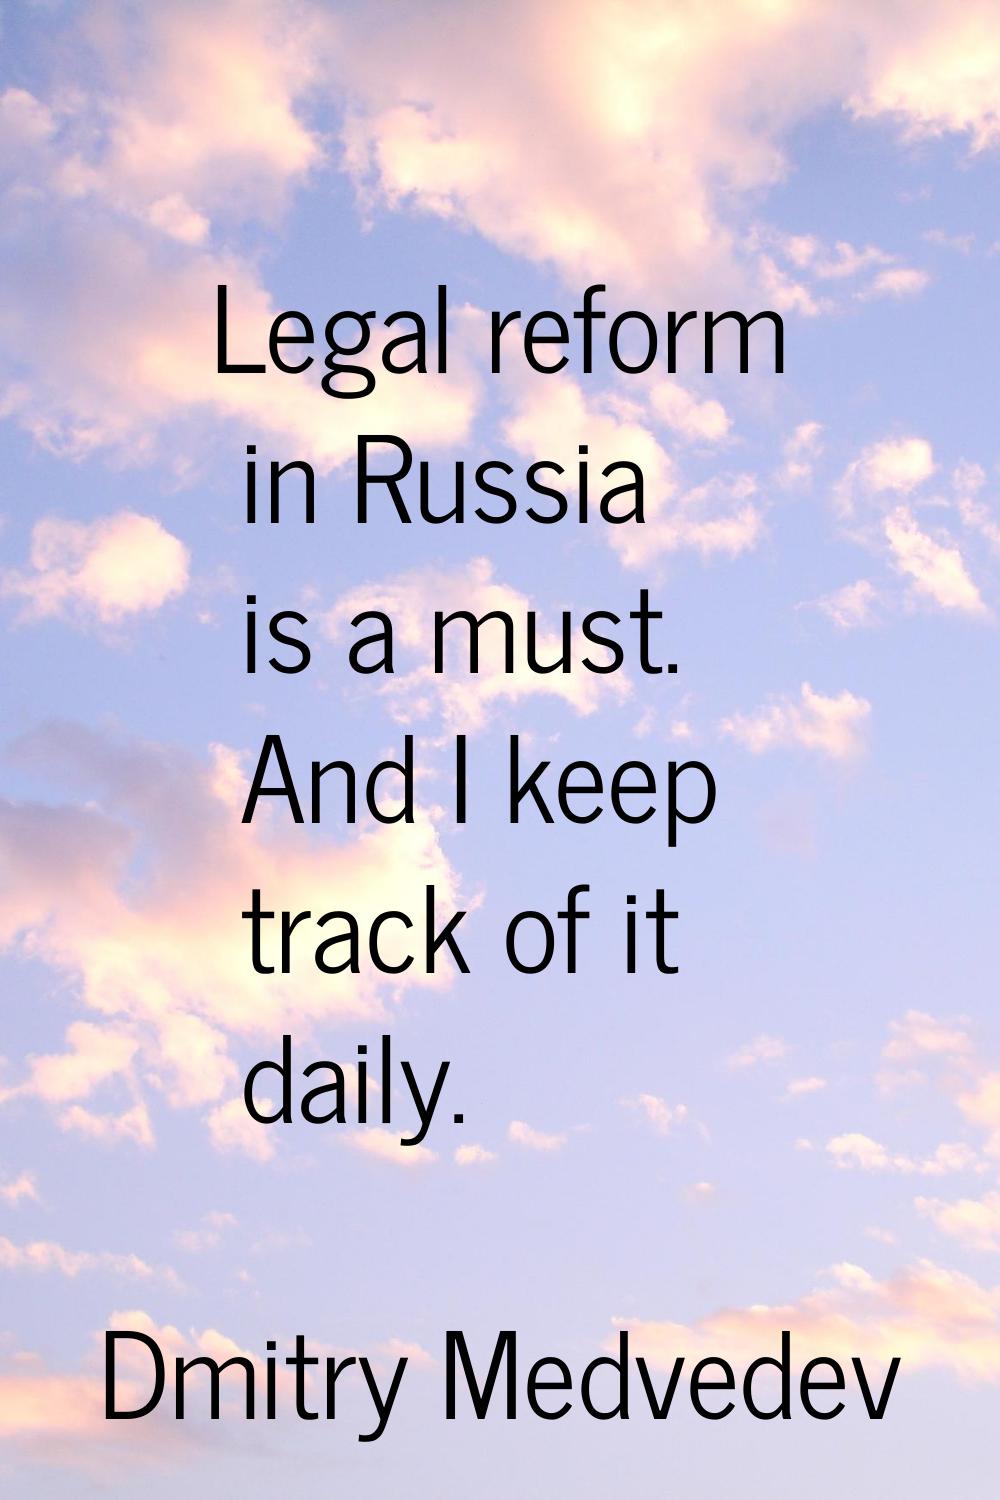 Legal reform in Russia is a must. And I keep track of it daily.